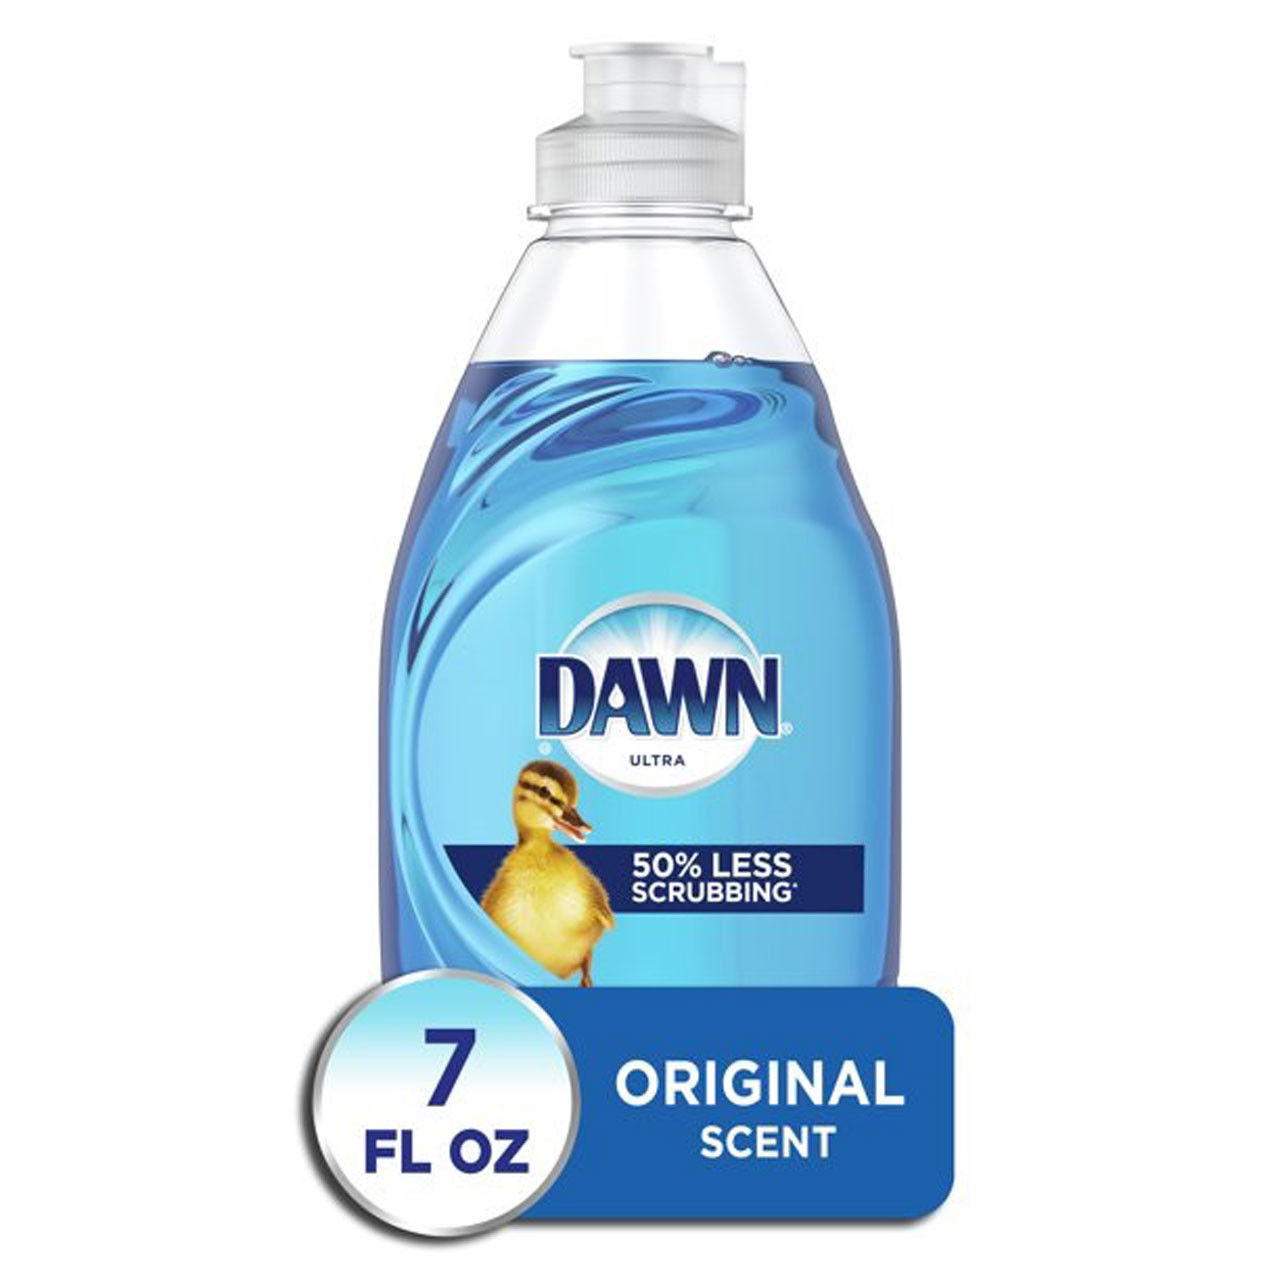 What sets Dawn Liquid Dish Detergent apart from other dish detergents in the 18 pack - dawn dish soap wholesale?